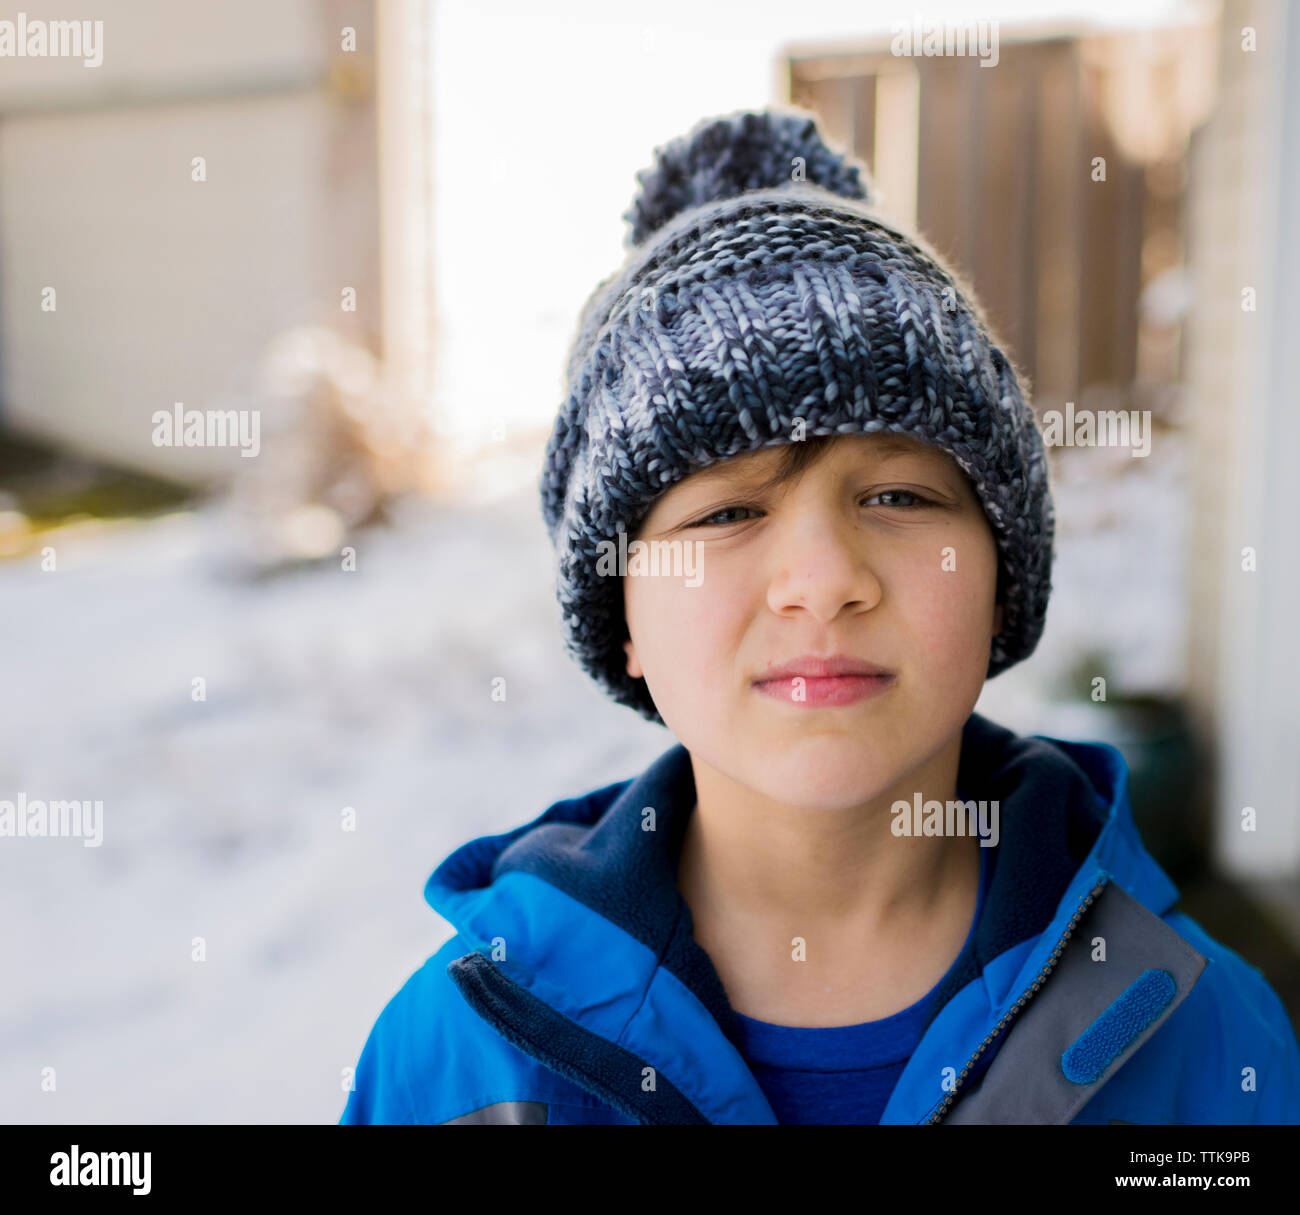 Portrait of boy wearing warm clothing during winter Stock Photo